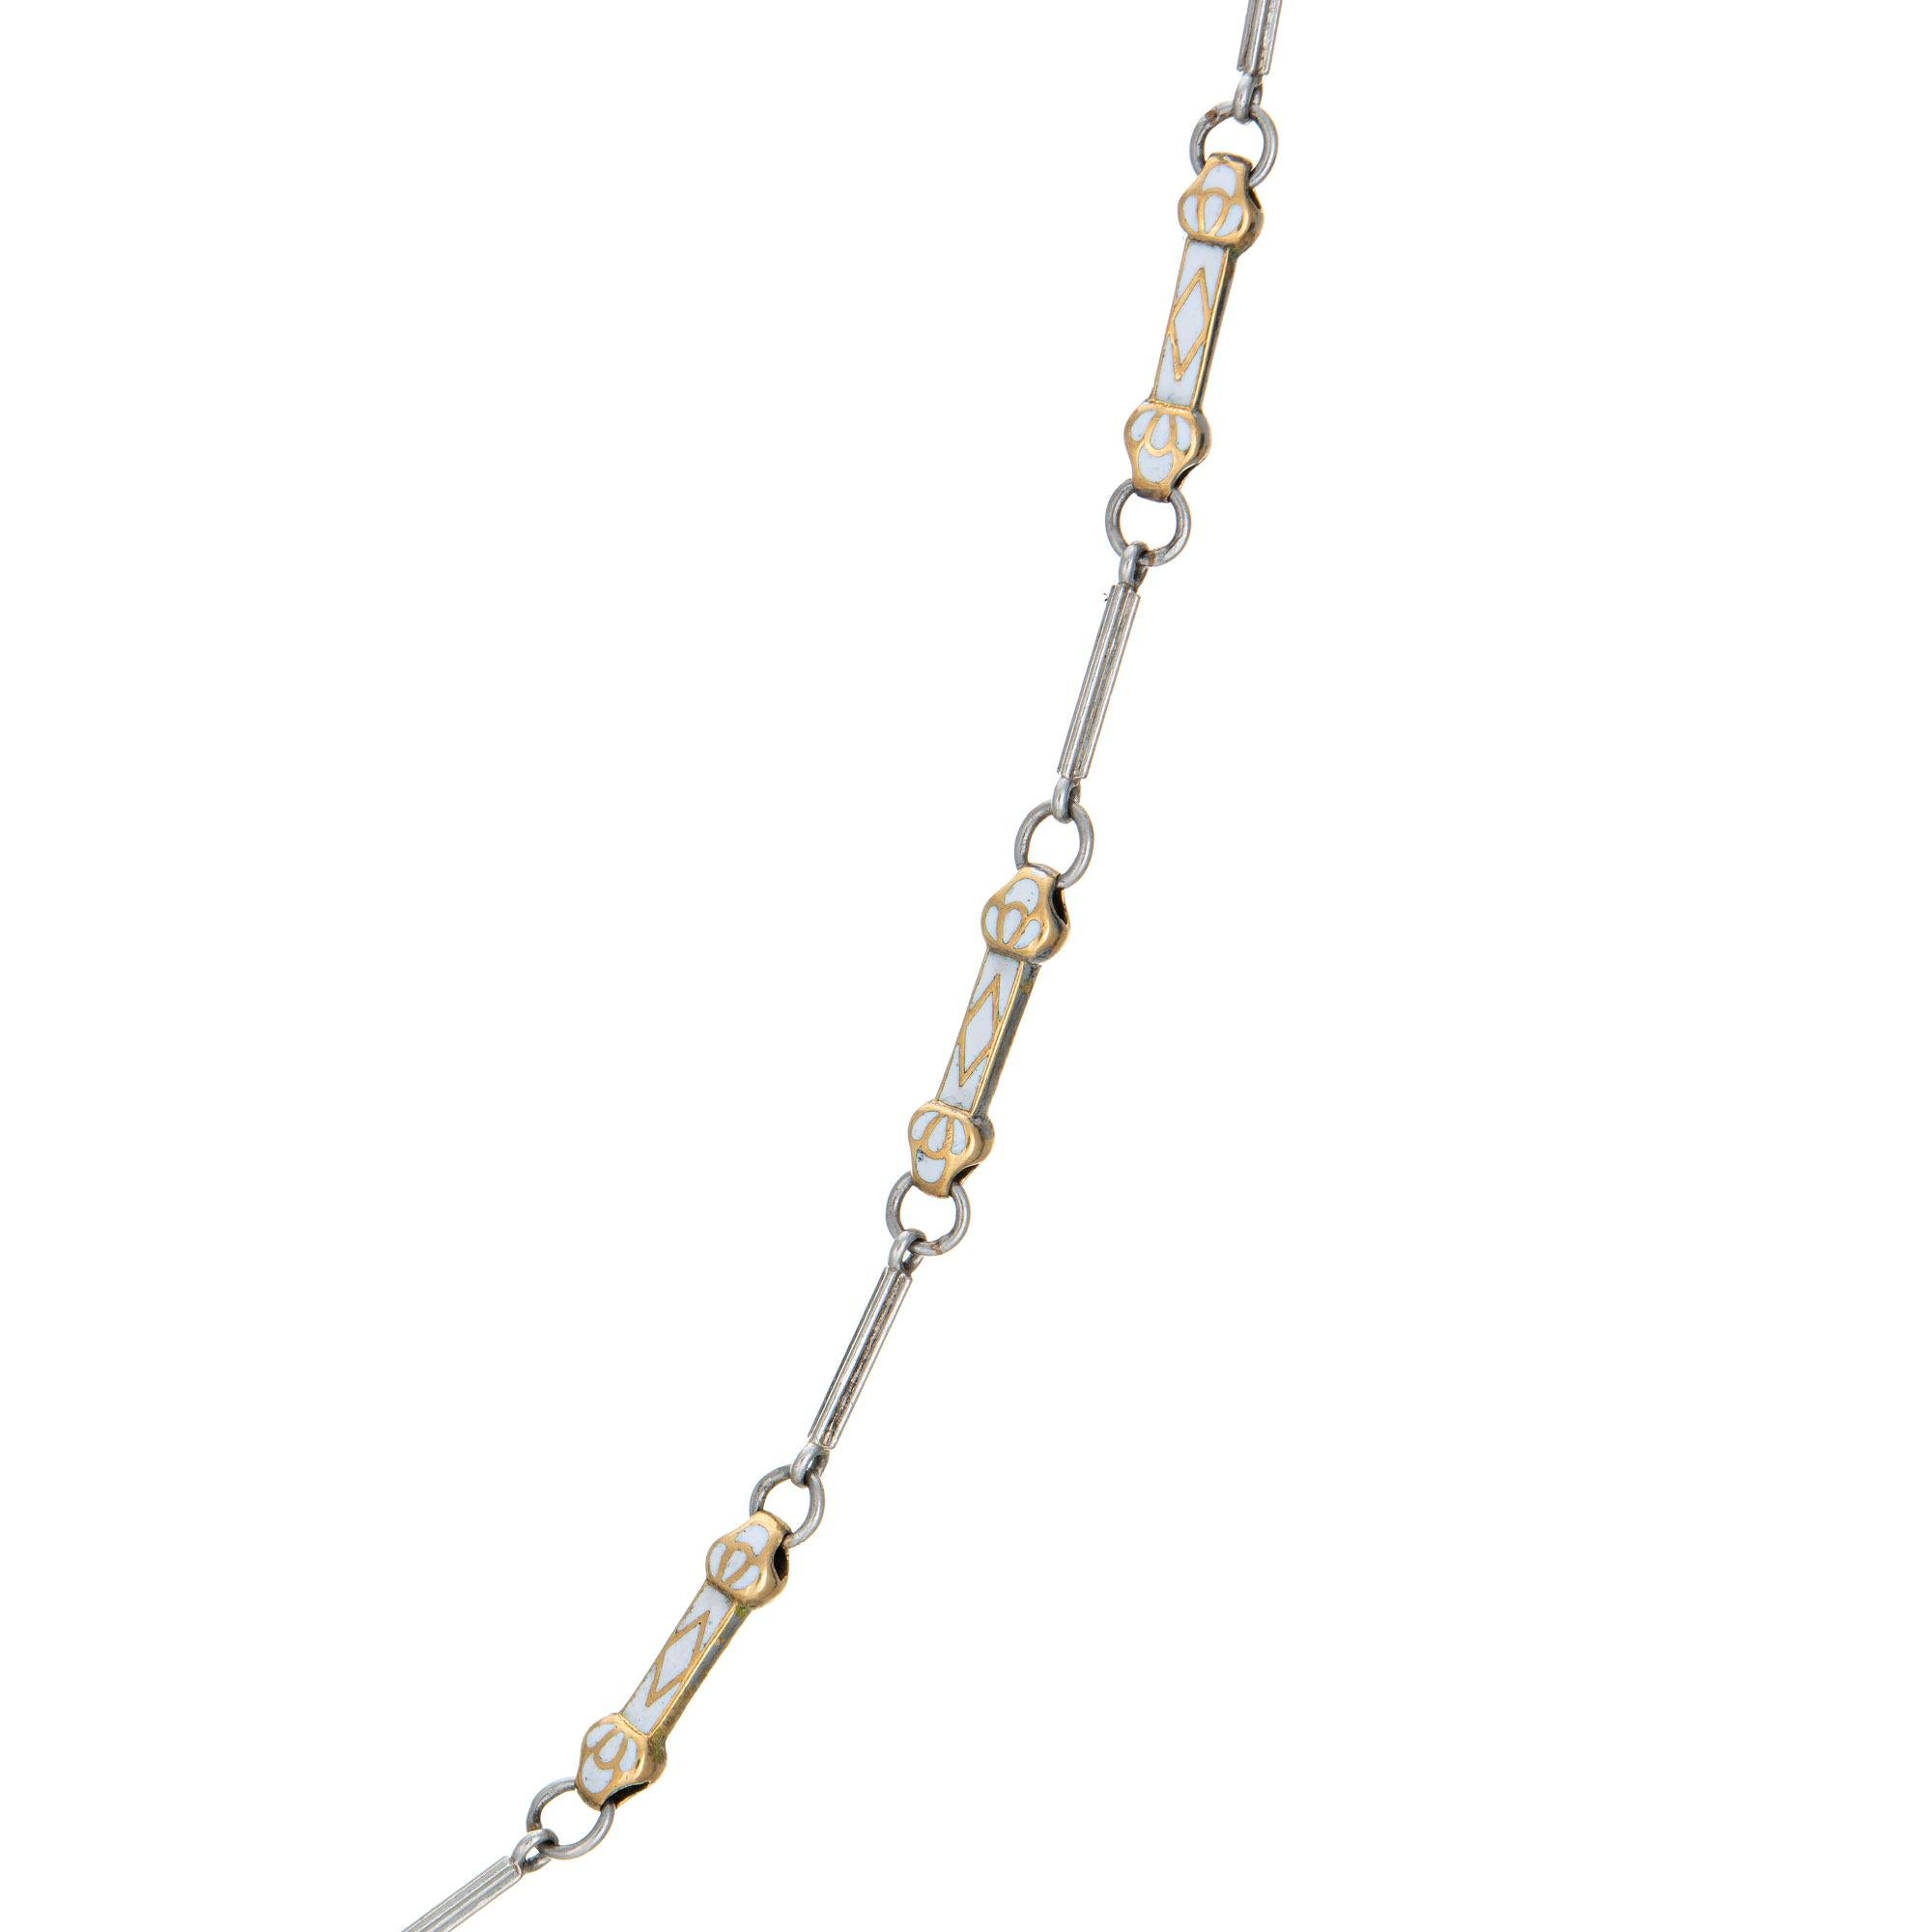 Stylish and finely detailed vintage Art Deco era enamel fob chain (necklace) crafted in platinum (circa 1920s to 1930s). 

The 15 inch choker length chain features double sided white enamel bar links. Originally a fob chain for a pocket watch, the